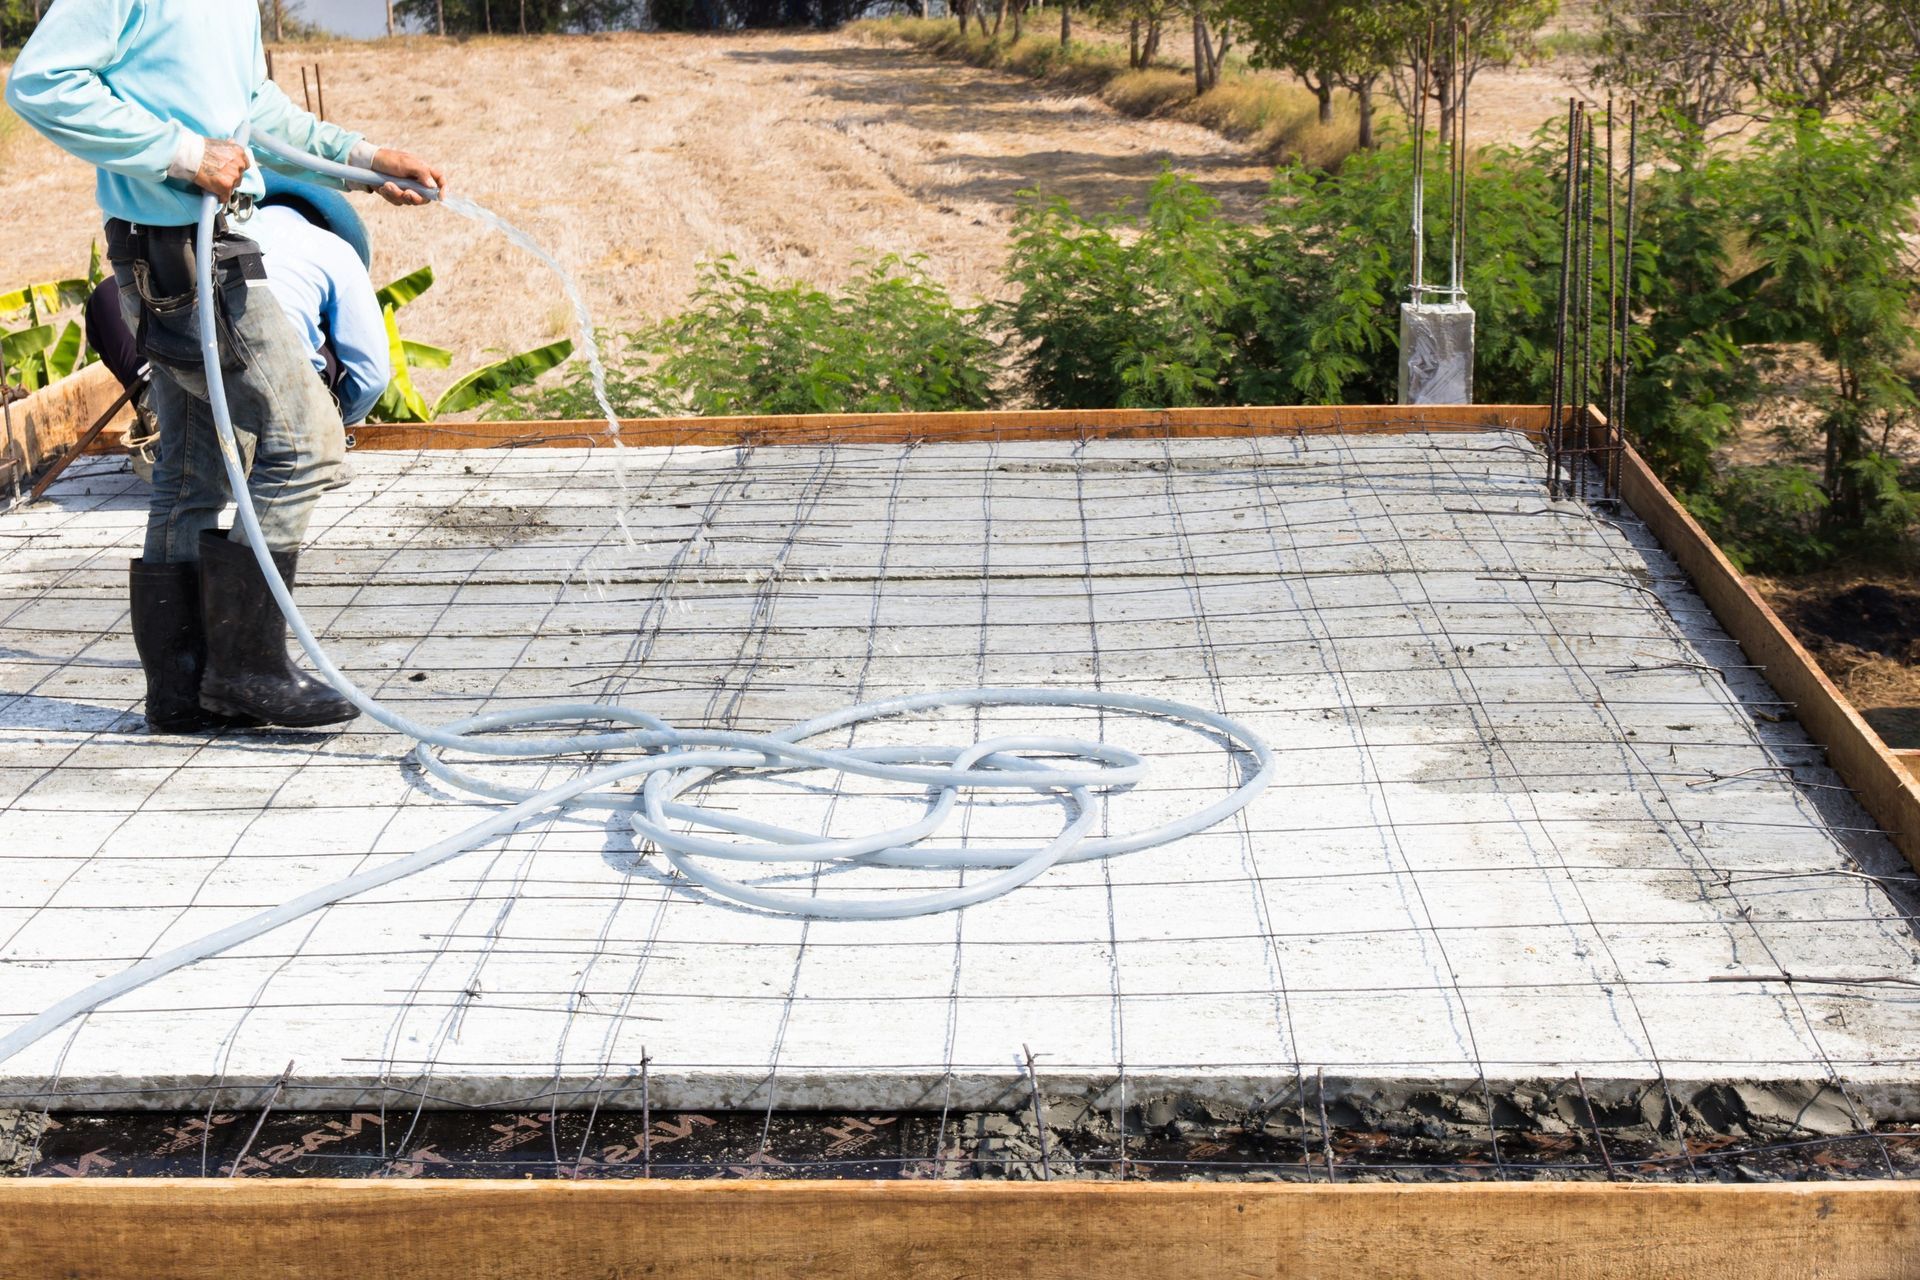 A worker in boots and a blue shirt sprays water onto a freshly poured concrete slab, essential for foundation contracting in West Palm Beach. The slab is framed with wooden boards and reinforced with steel mesh. Surrounded by dirt and greenery, the hose lies coiled on the concrete surface.